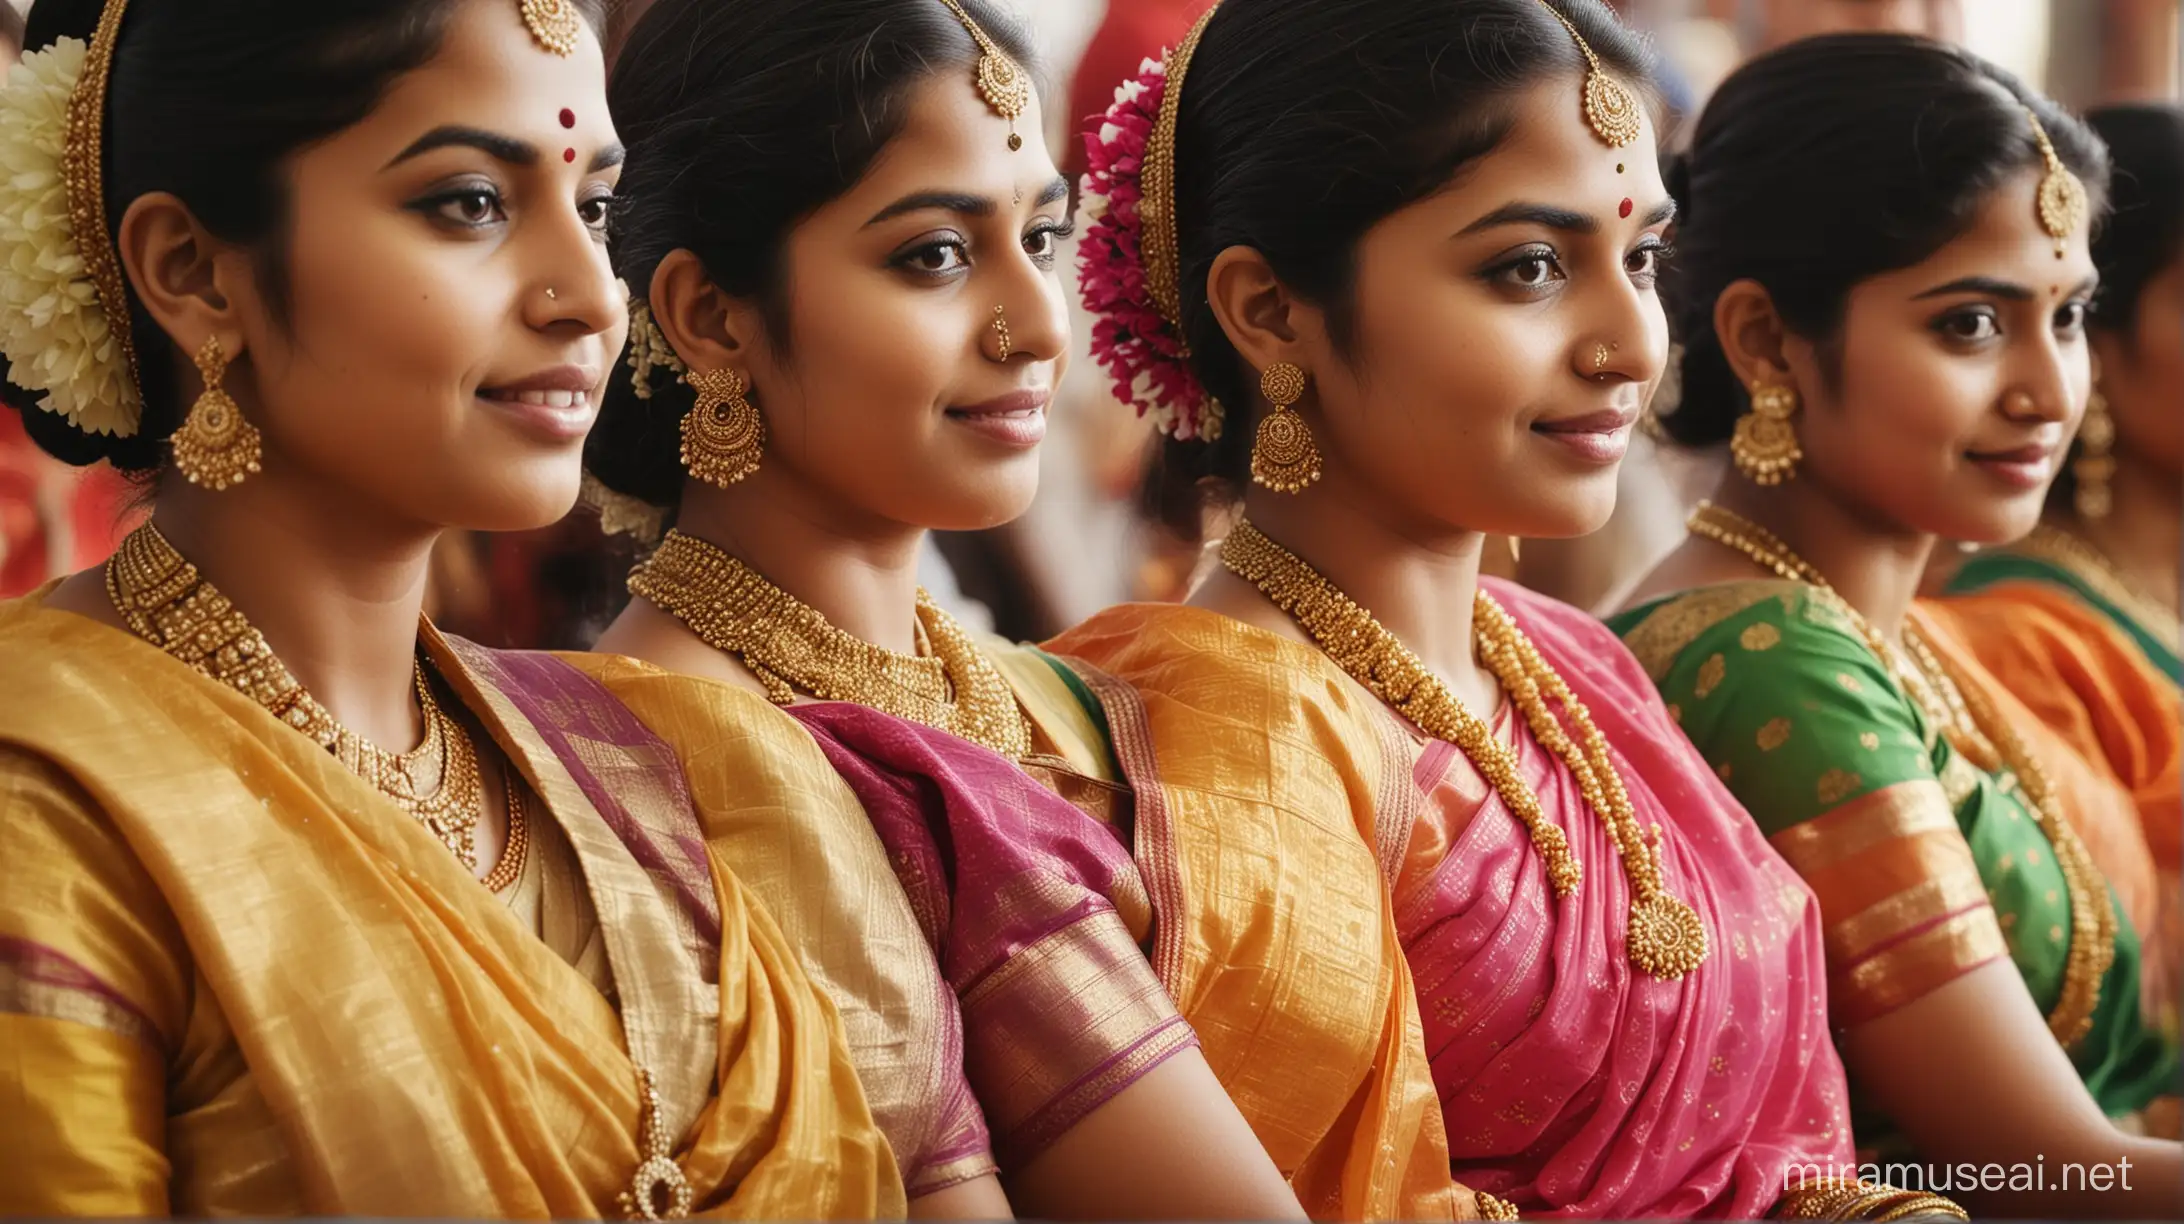 CloseUp Shot of South Indian Women Adorned in Colorful Sarees and Jewelry